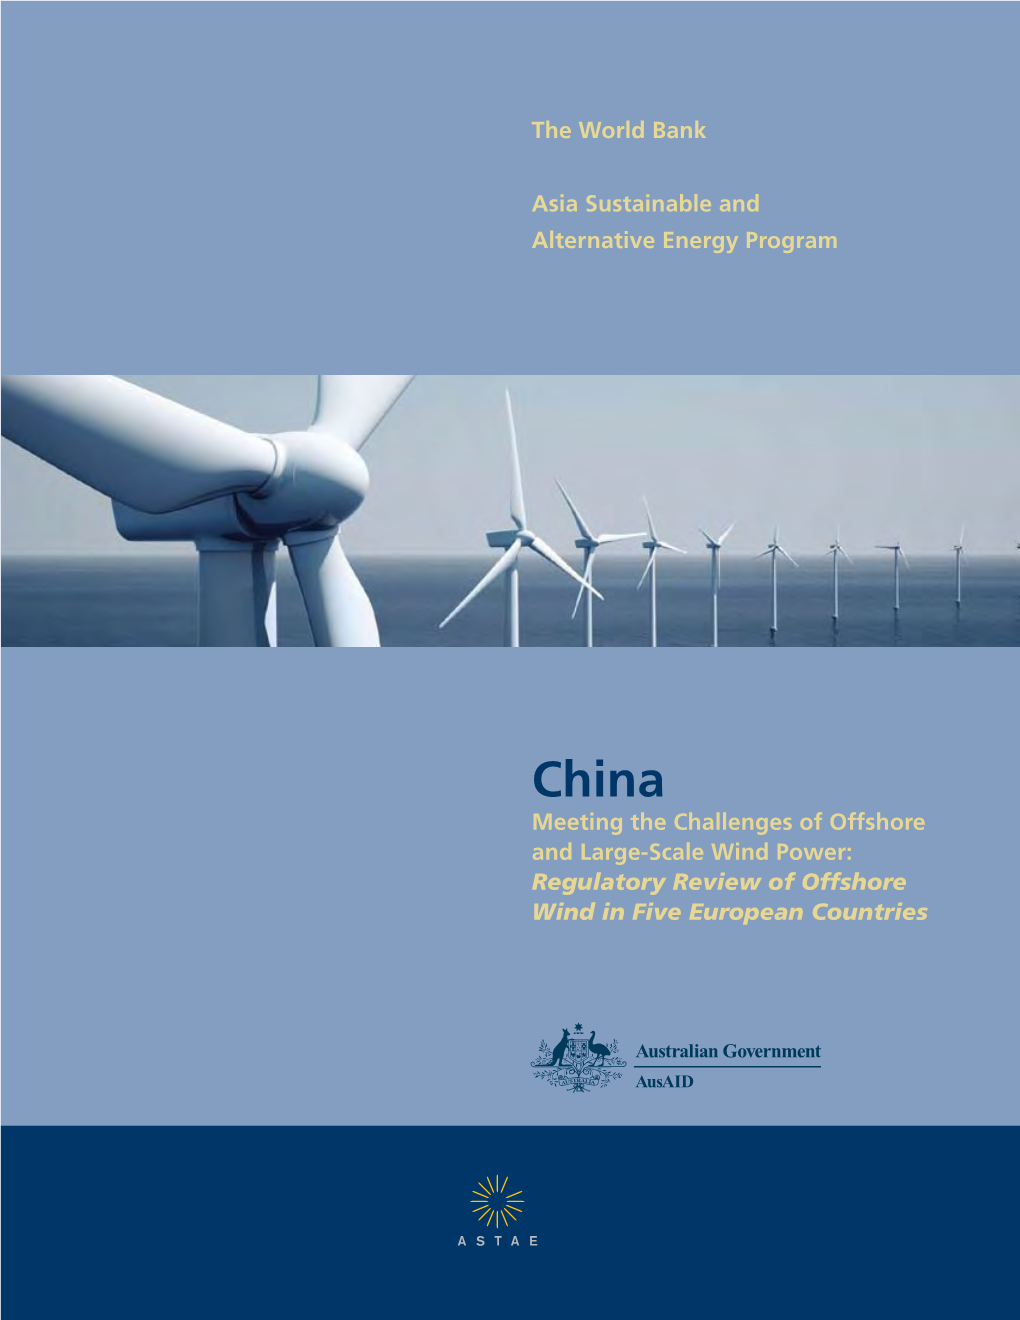 The World Bank Asia Sustainable and Alternative Energy